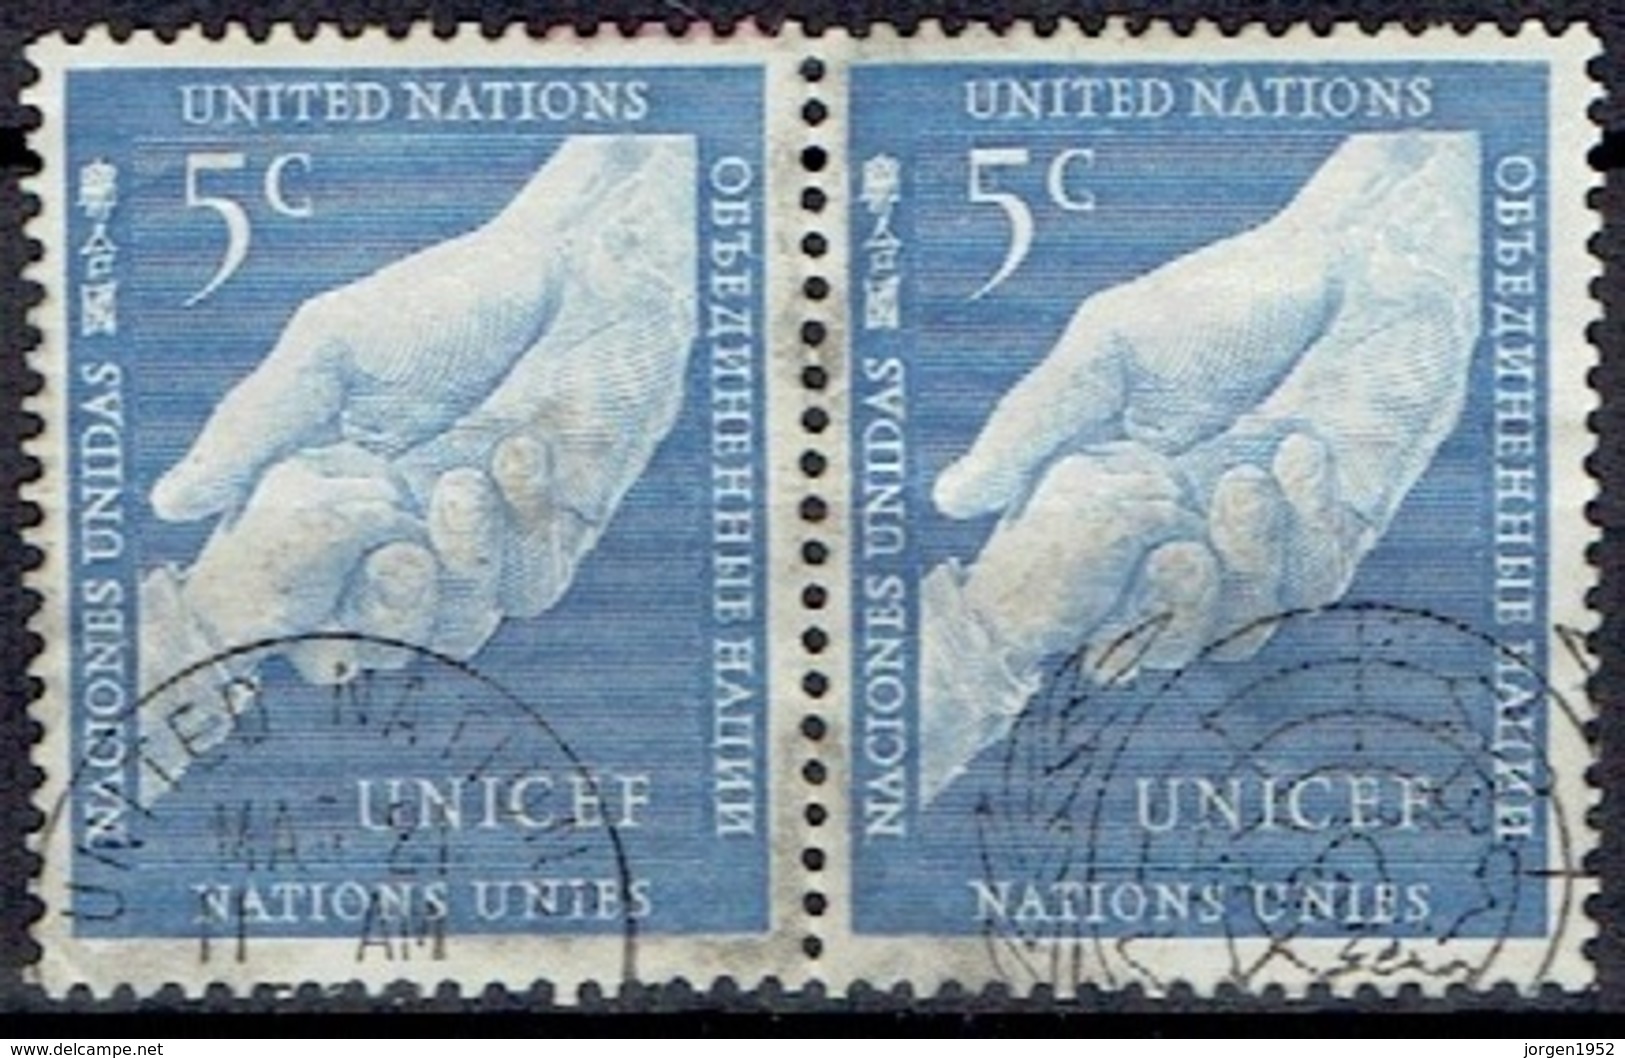 UNITED NATIONS # NEW YORK FROM 1951 STAMPWORLD 5 - Oblitérés